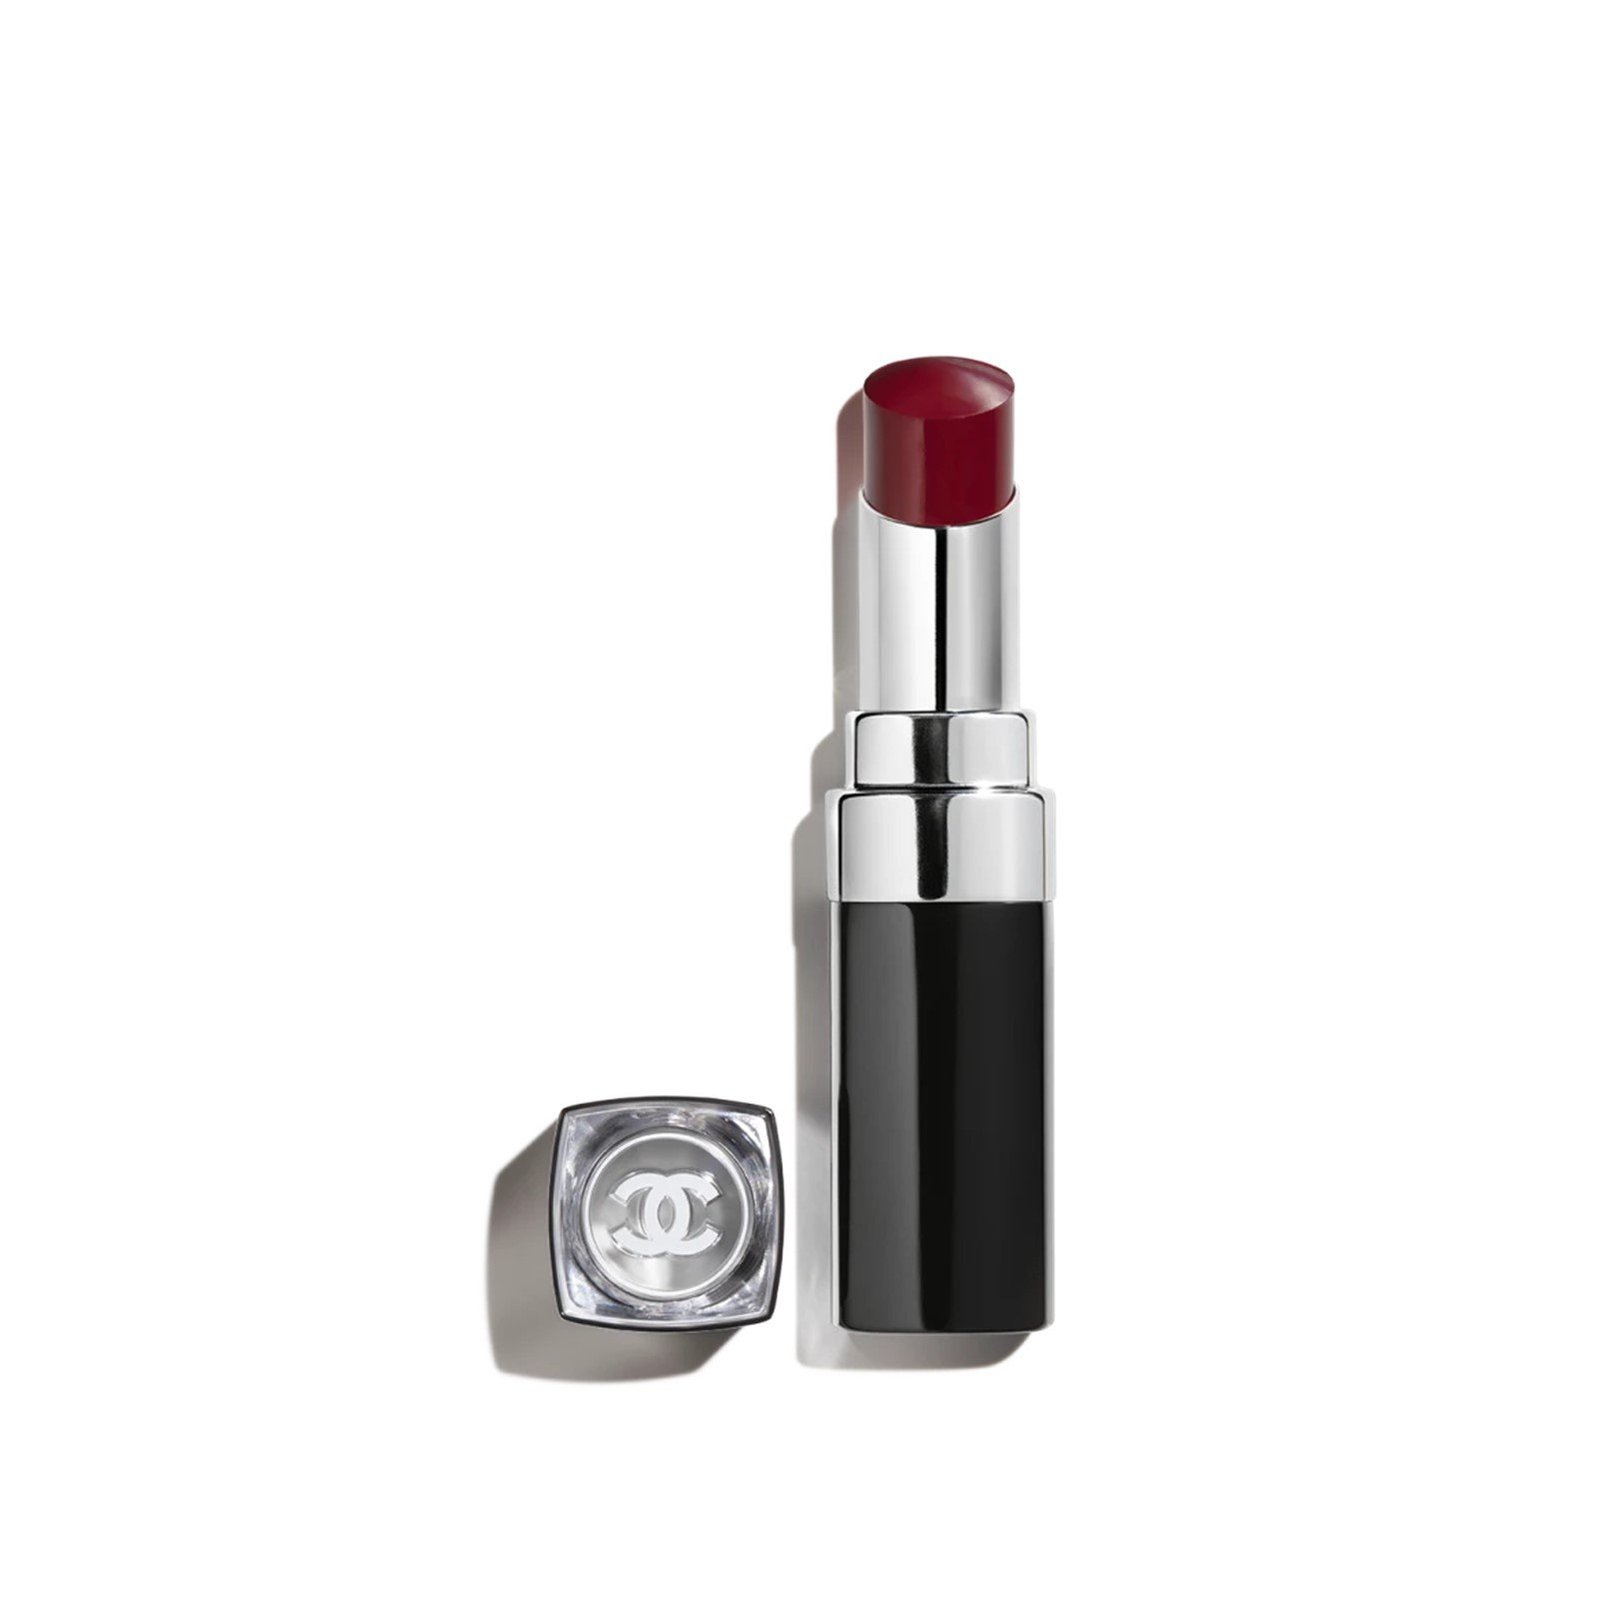 CHANEL Rouge Coco Bloom Intense Shine Lip Colour 144 Unexpected 3g